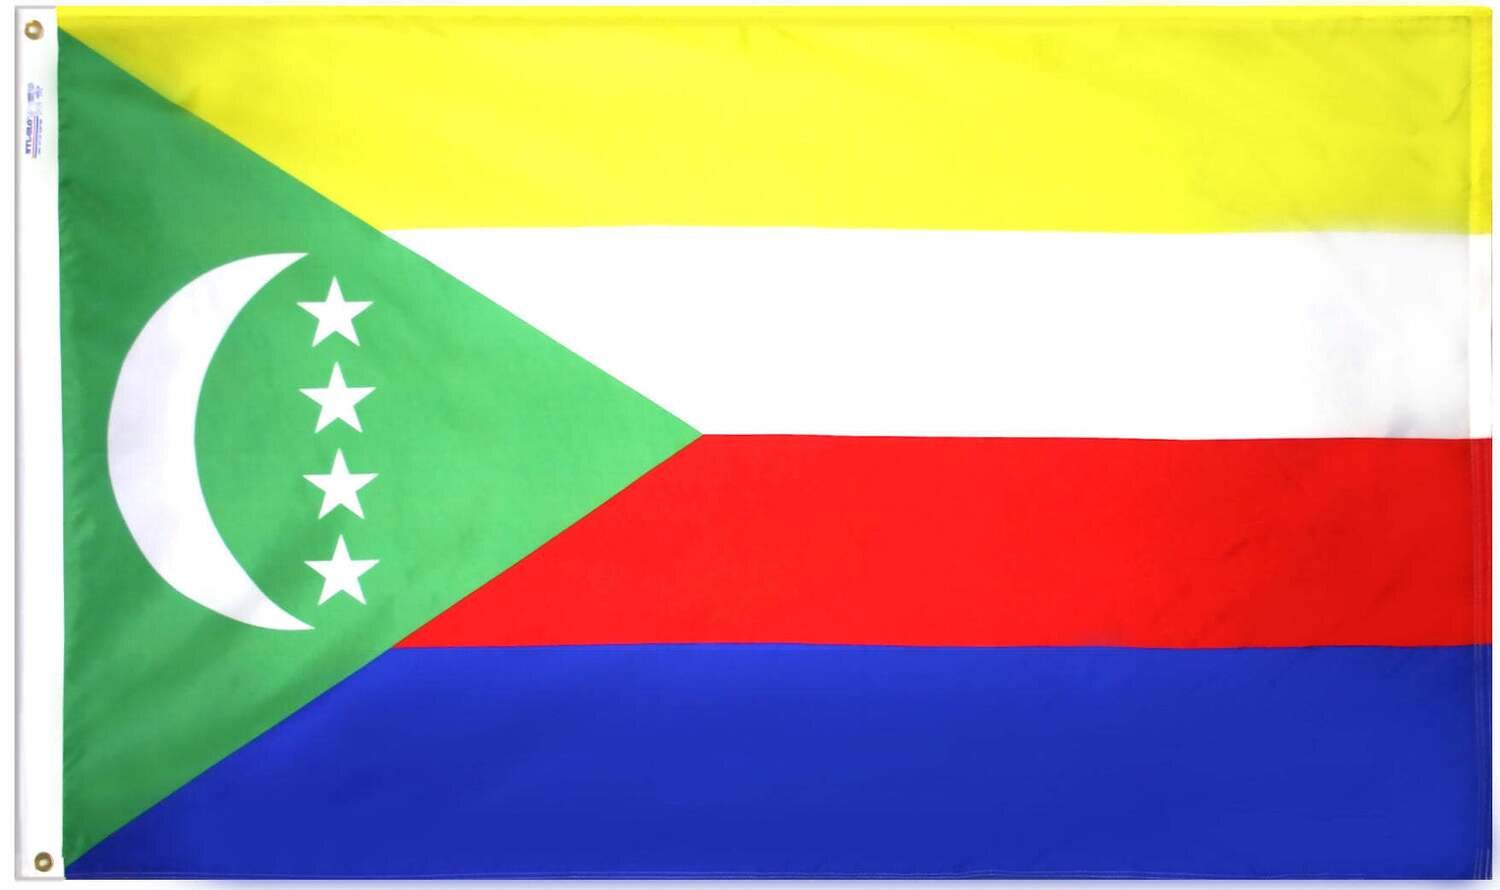 Comoros Flag 3x5 ft. Nylon SolarGuard Nyl-Glo 100% Made in USA to Official United Nations Design Specifications.